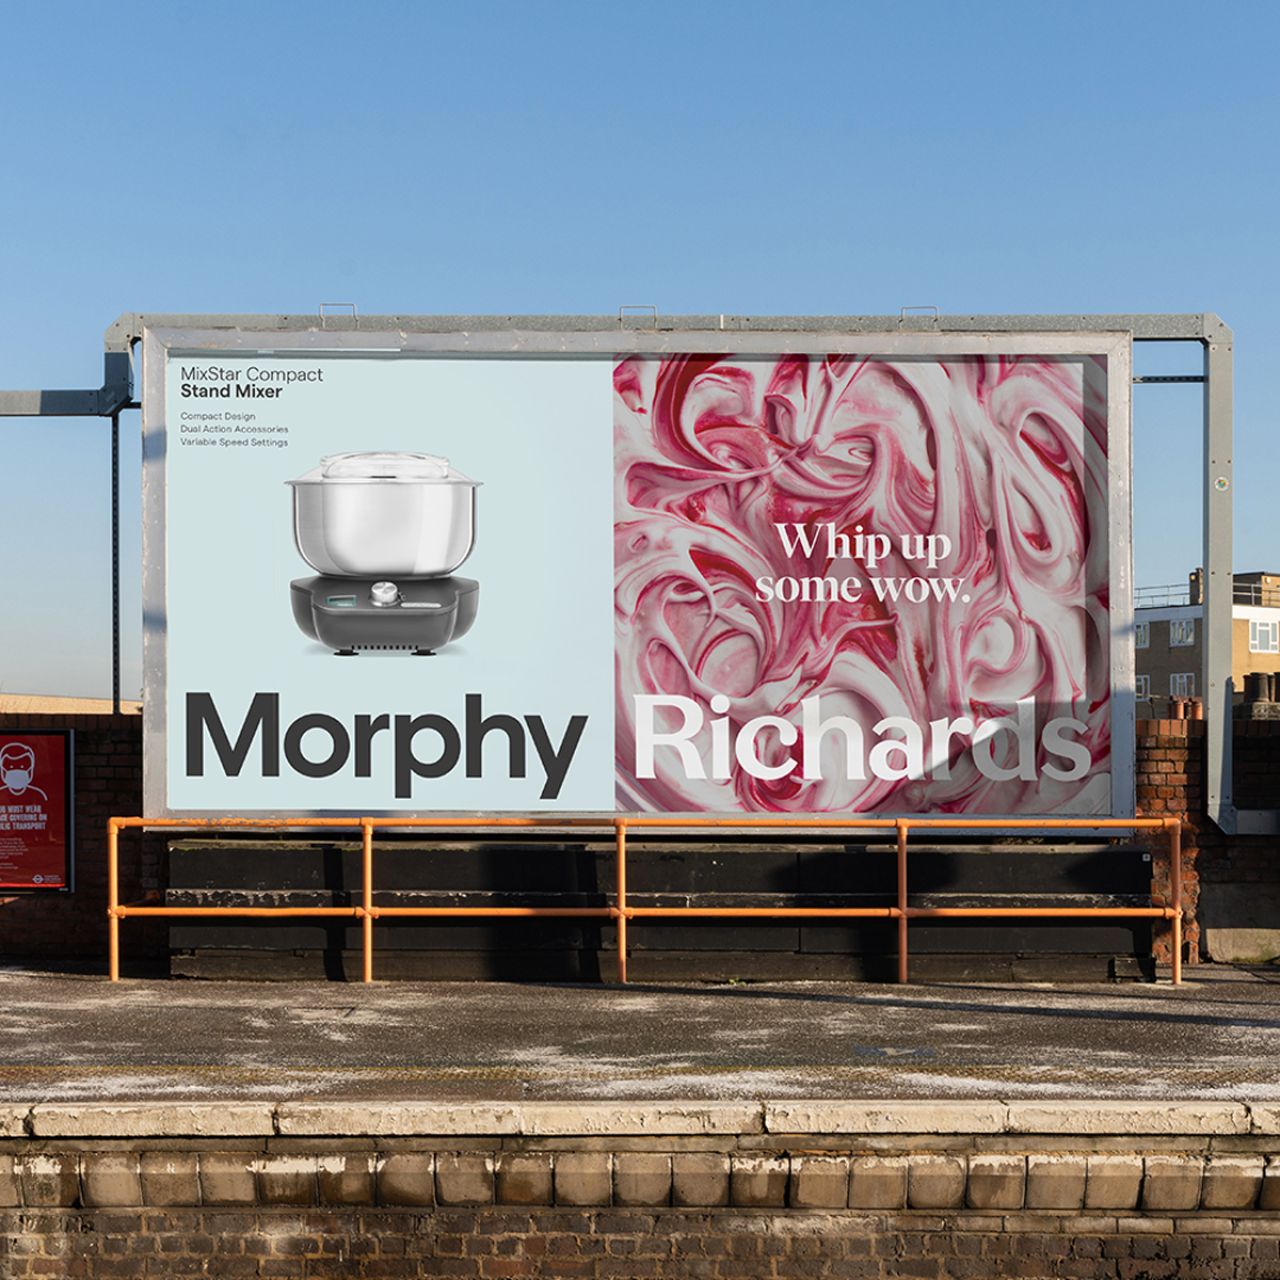 Morphy Richards launches new brand film in line with its global positioning